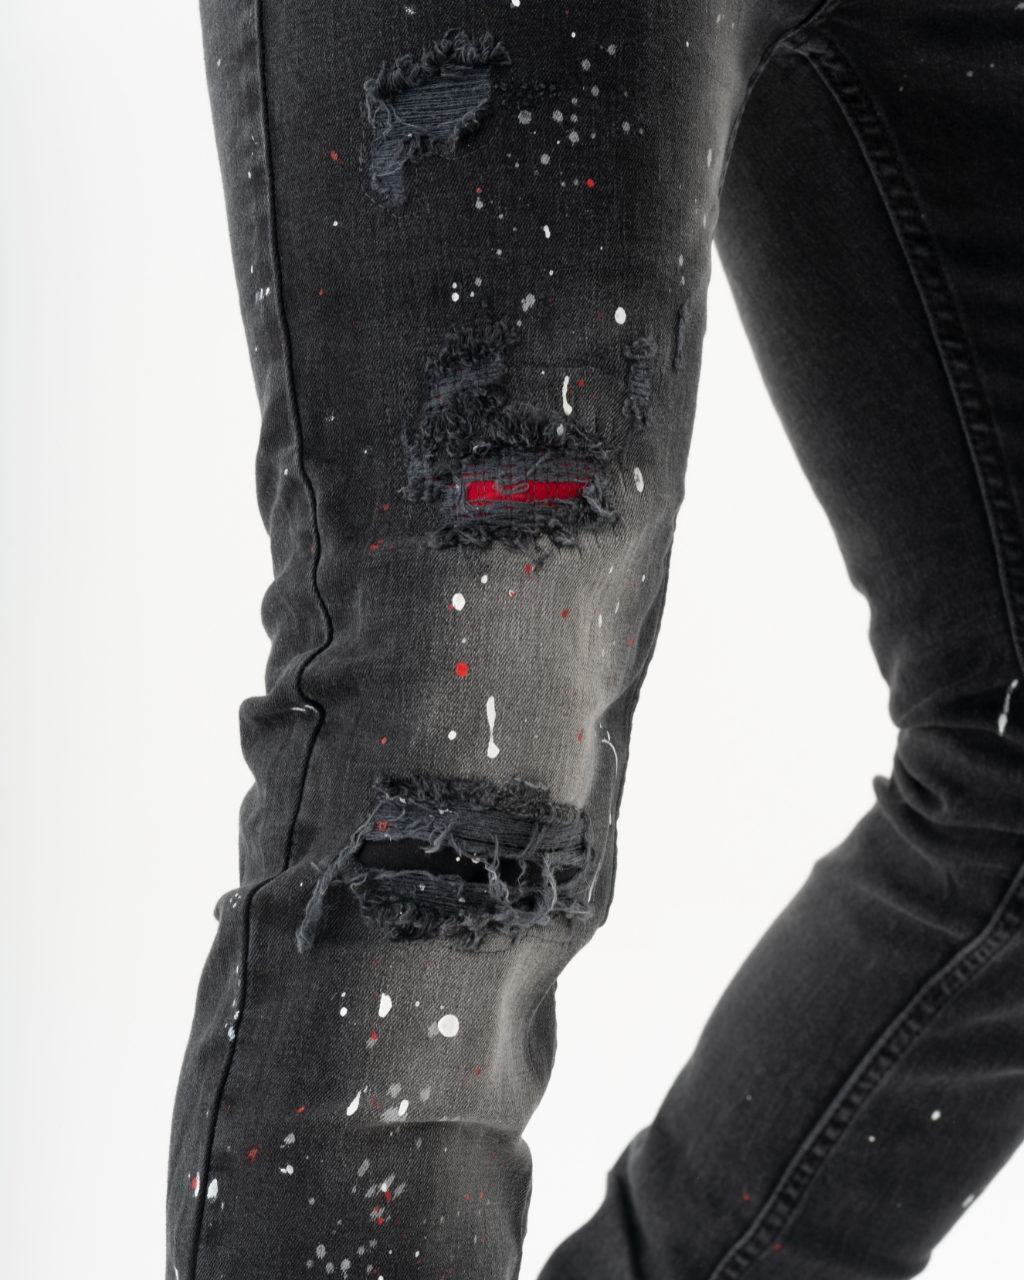 A pair of HOTSPOT skinny fit men's streetwear jeans with paint splatters on them.